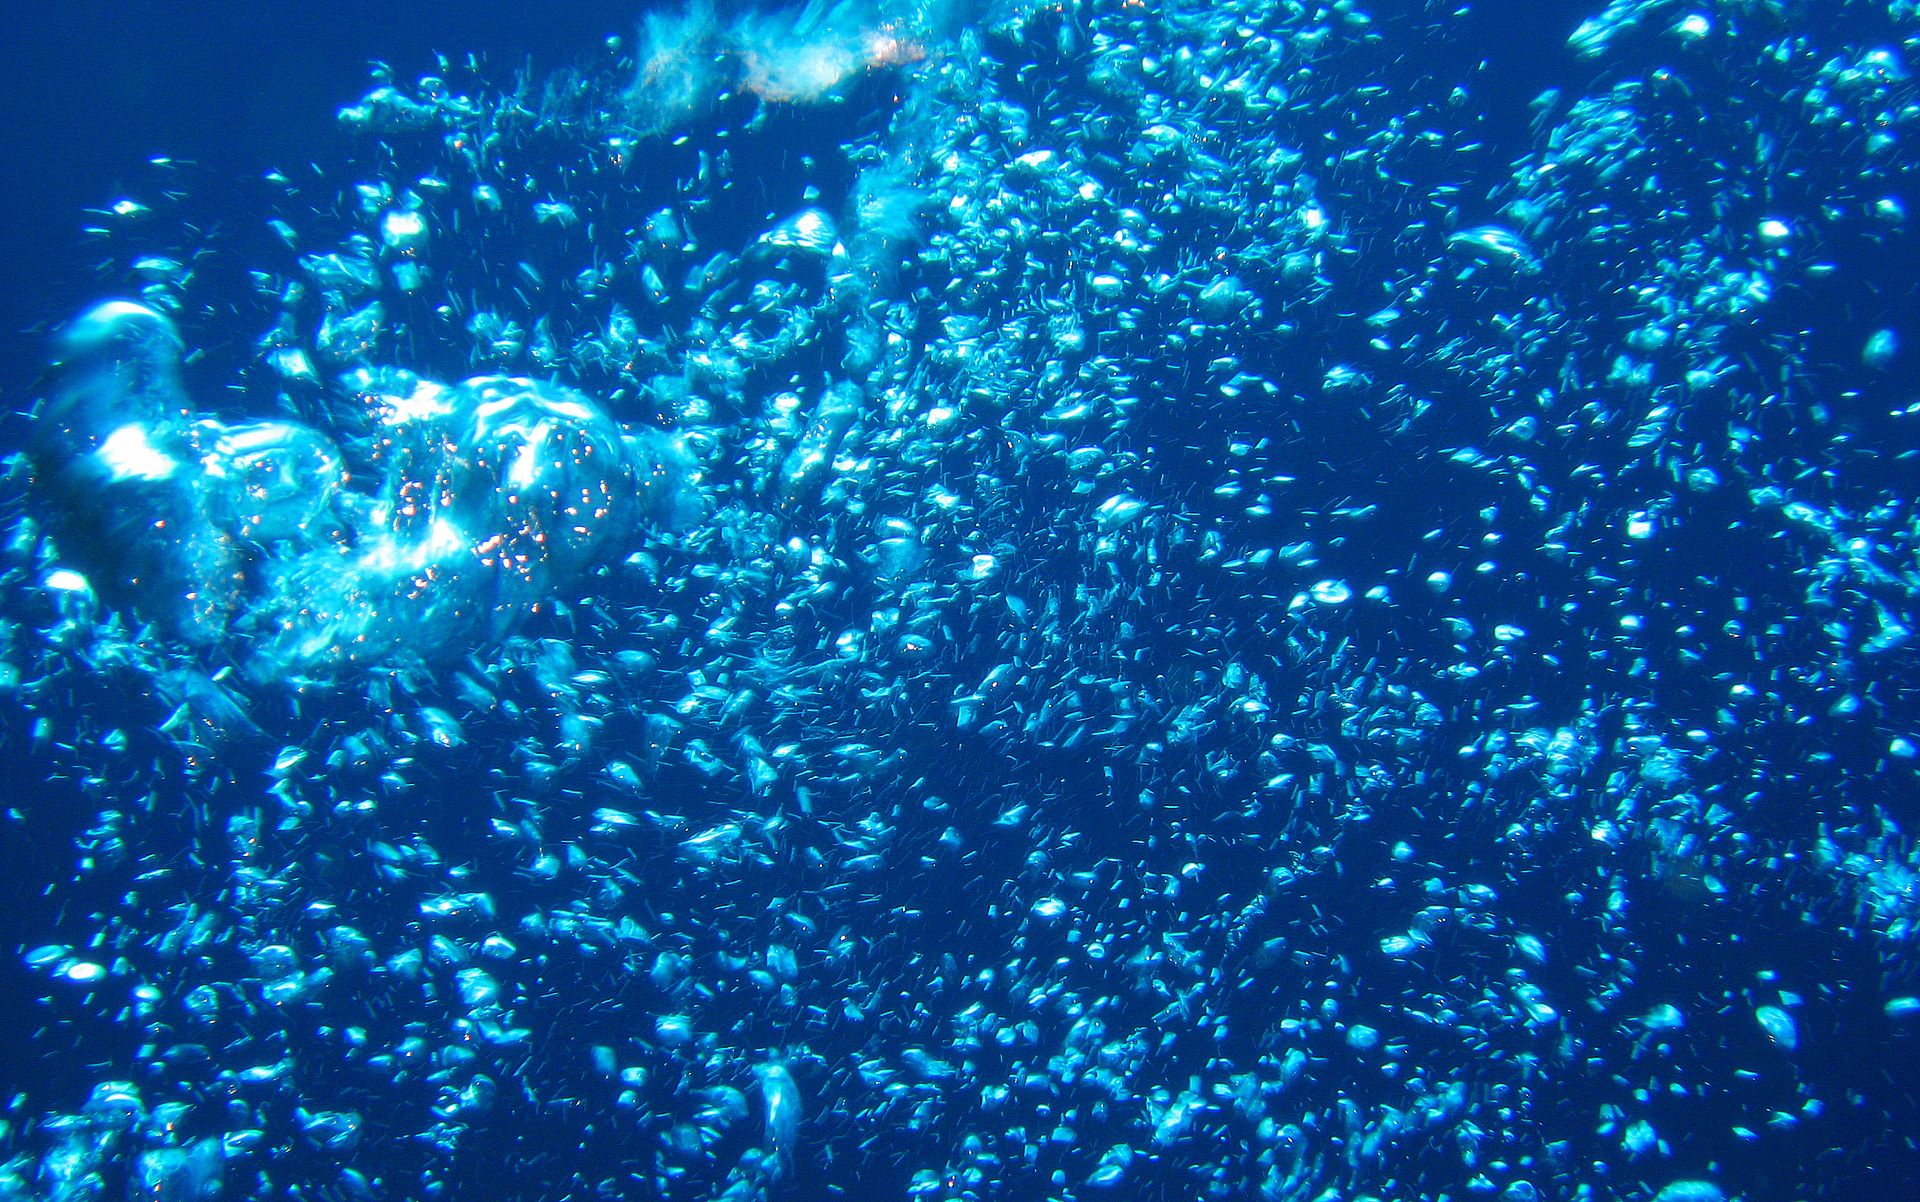 underwater bubbles wallpaper high resolution 1920x1200 pixel for 16:10 